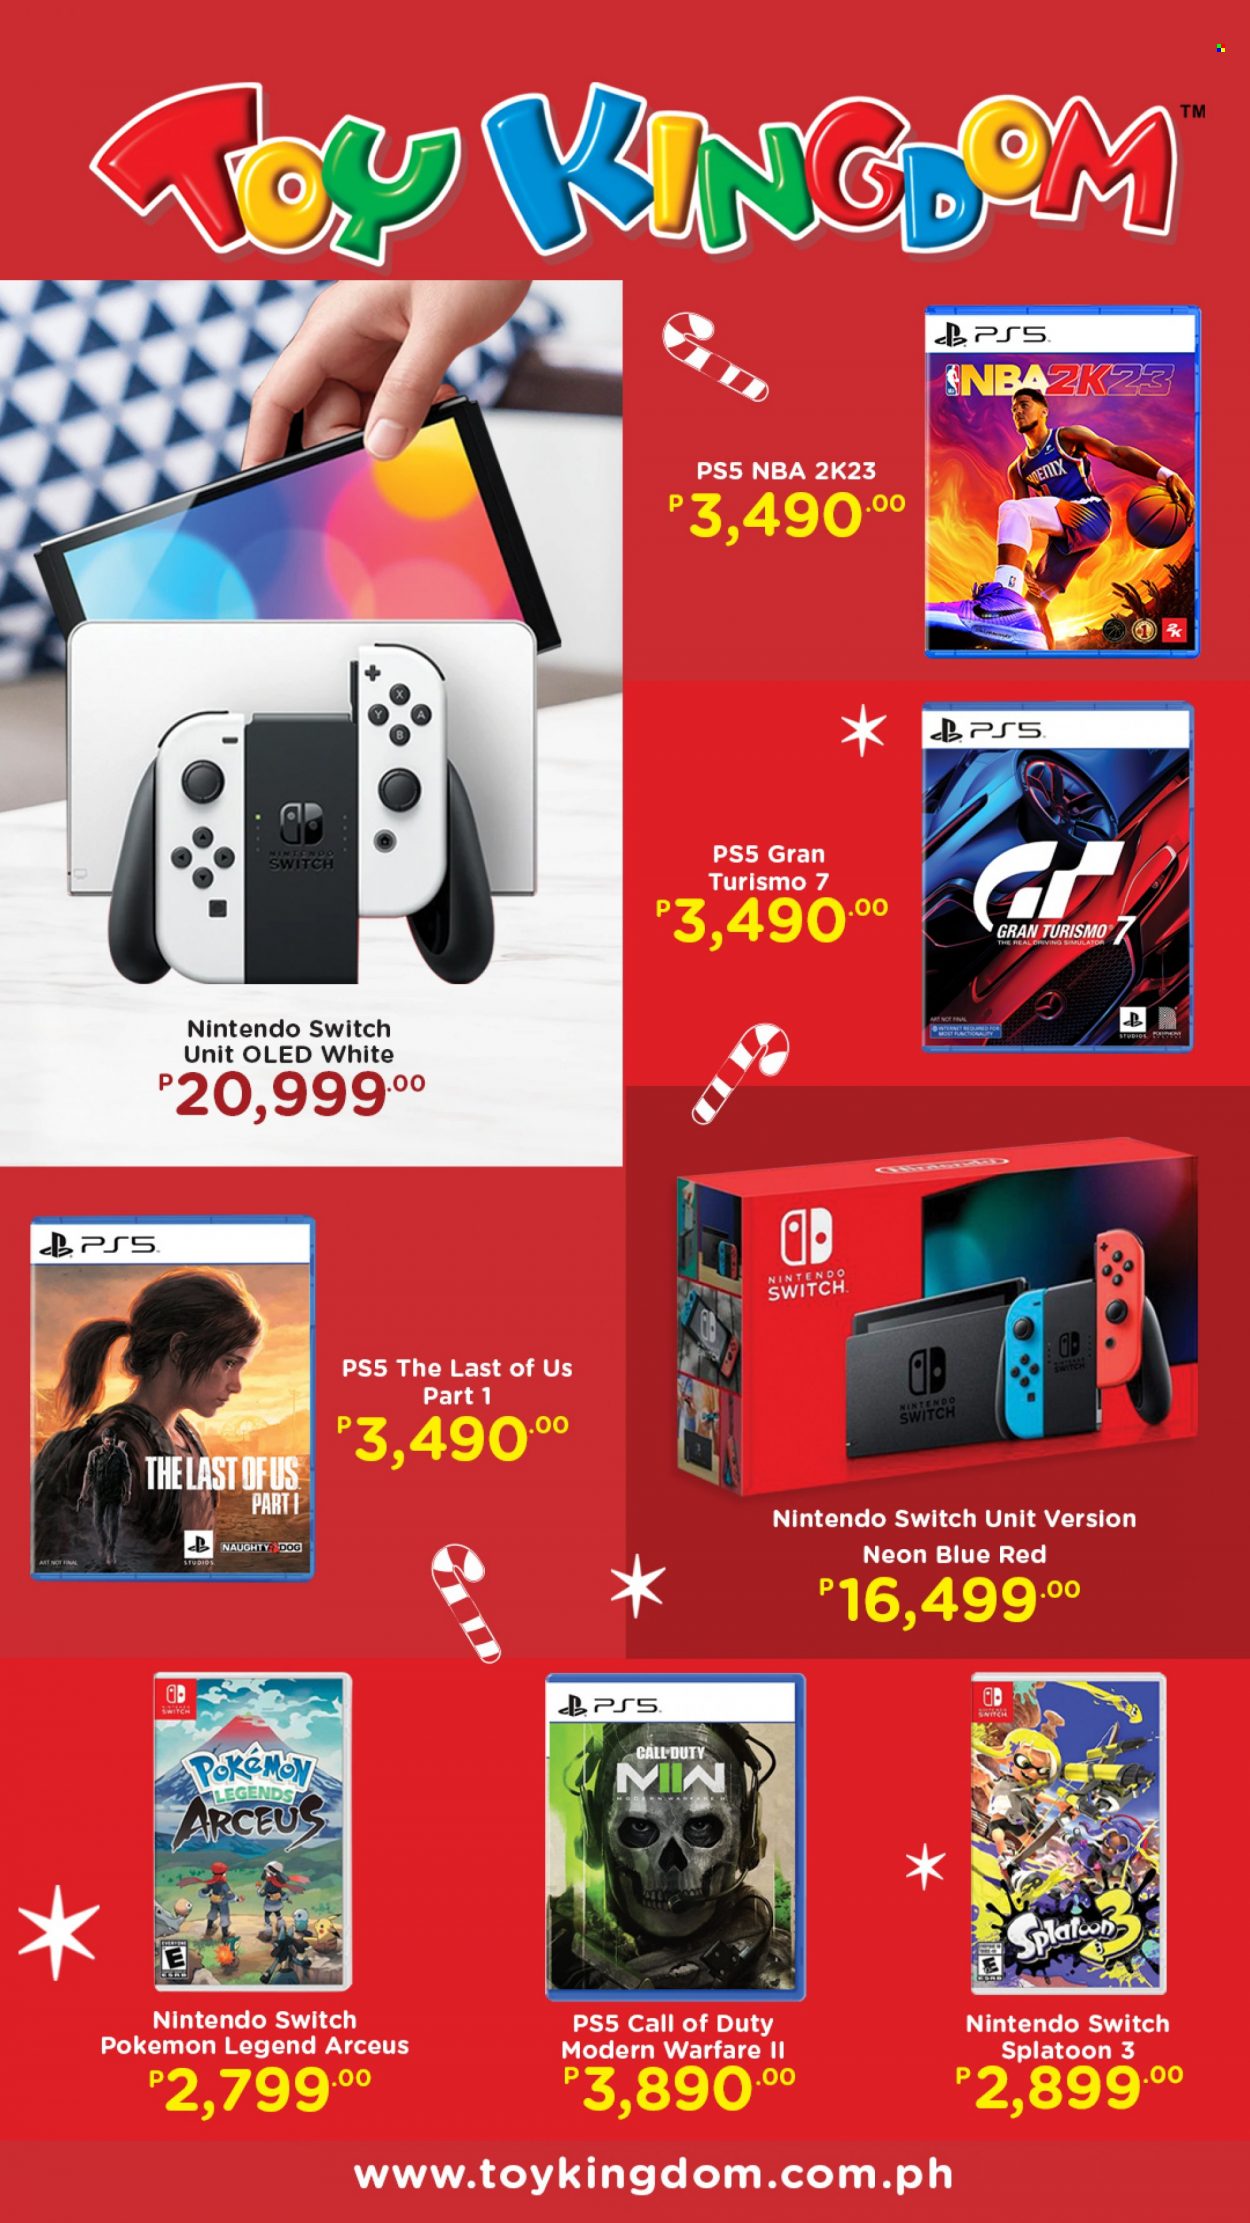 thumbnail - Toy Kingdom offer  - Sales products - Nintendo Switch, PlayStation, PlayStation 5, Pokémon, toys. Page 6.